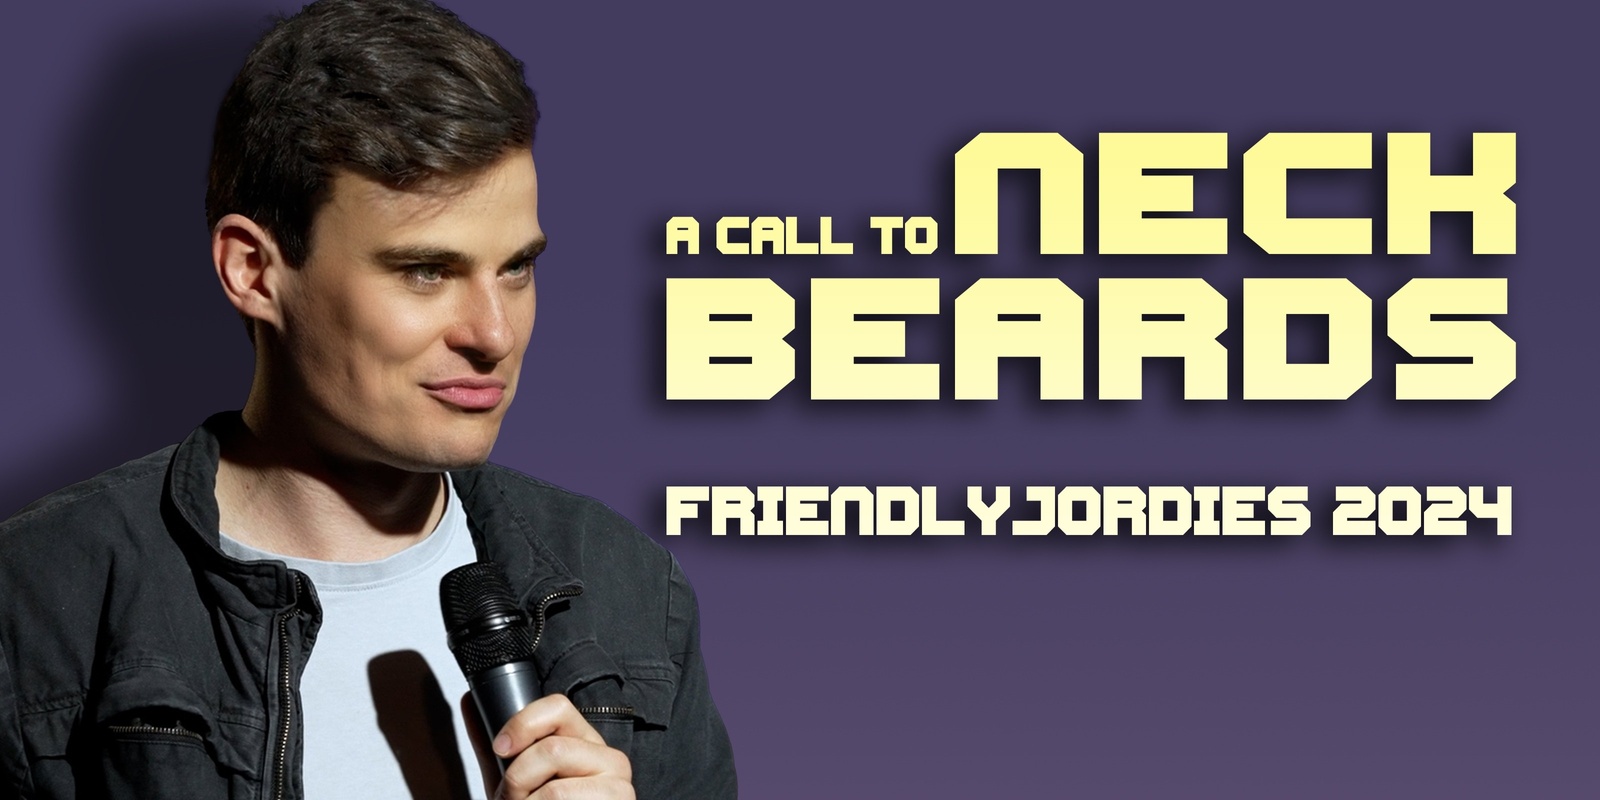 Banner image for Melbourne - Friendlyjordies Presents: A Call to Neck Beards